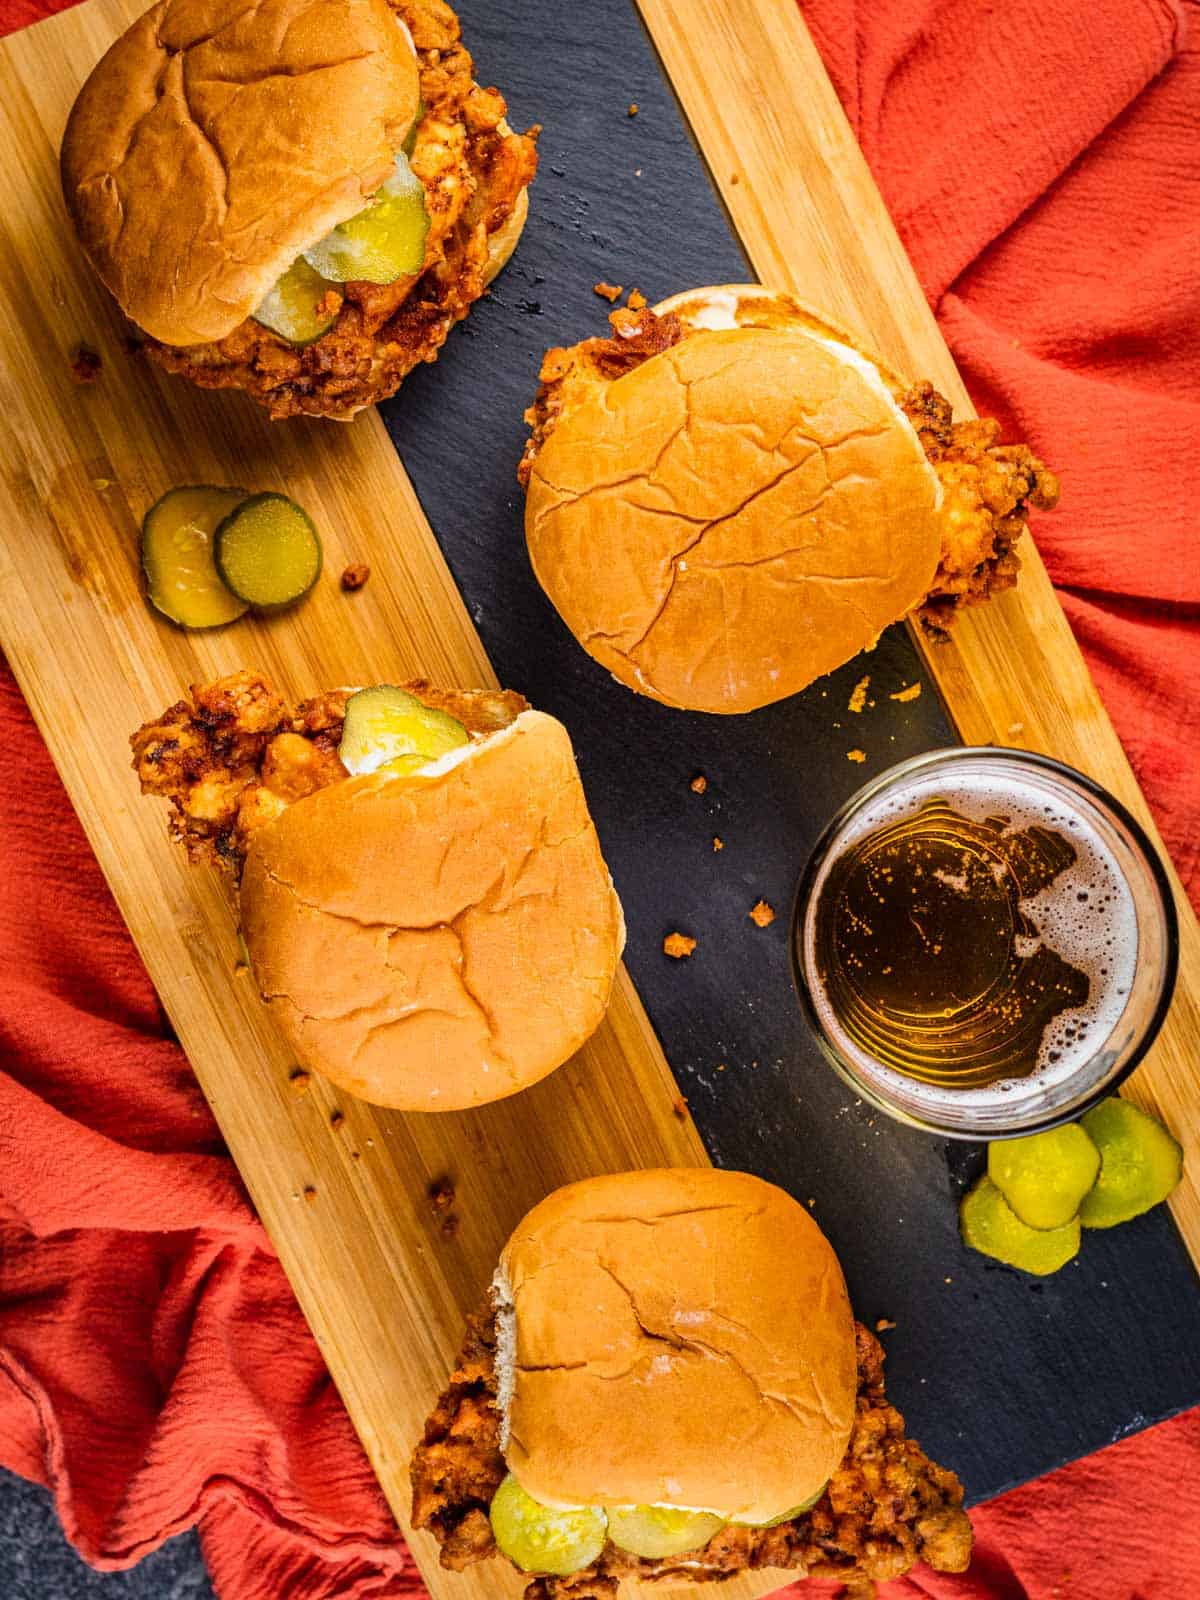 fried chicken sandwiches on a wooden tray with a beer and pickles laying around.